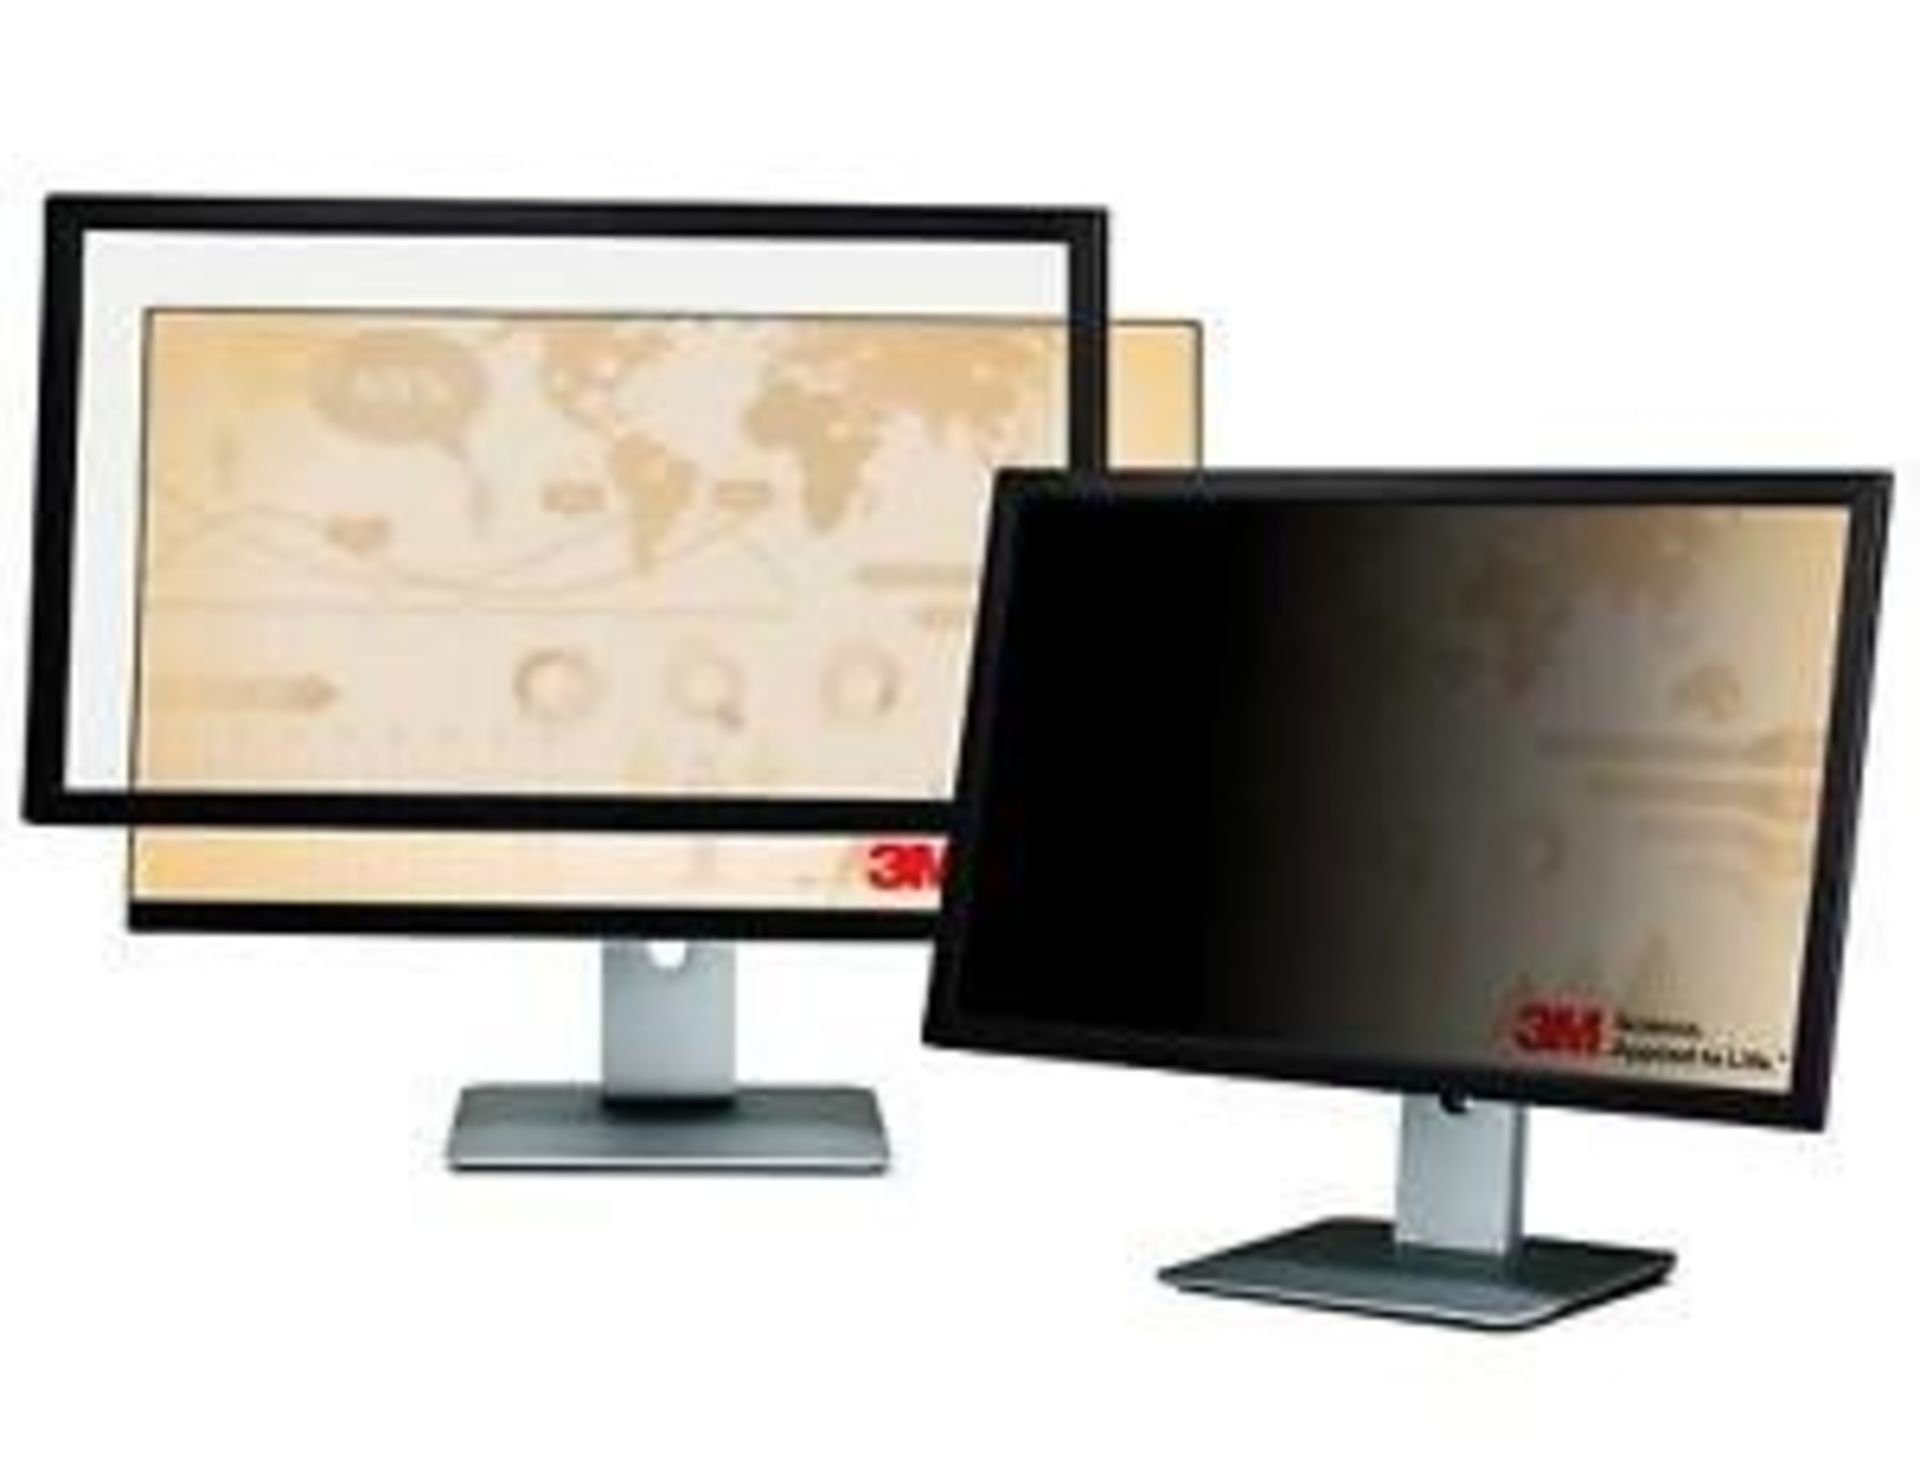 1 BOXED 3M PRIVACY FILTER FOR WIDESCREEN MONITOR 1